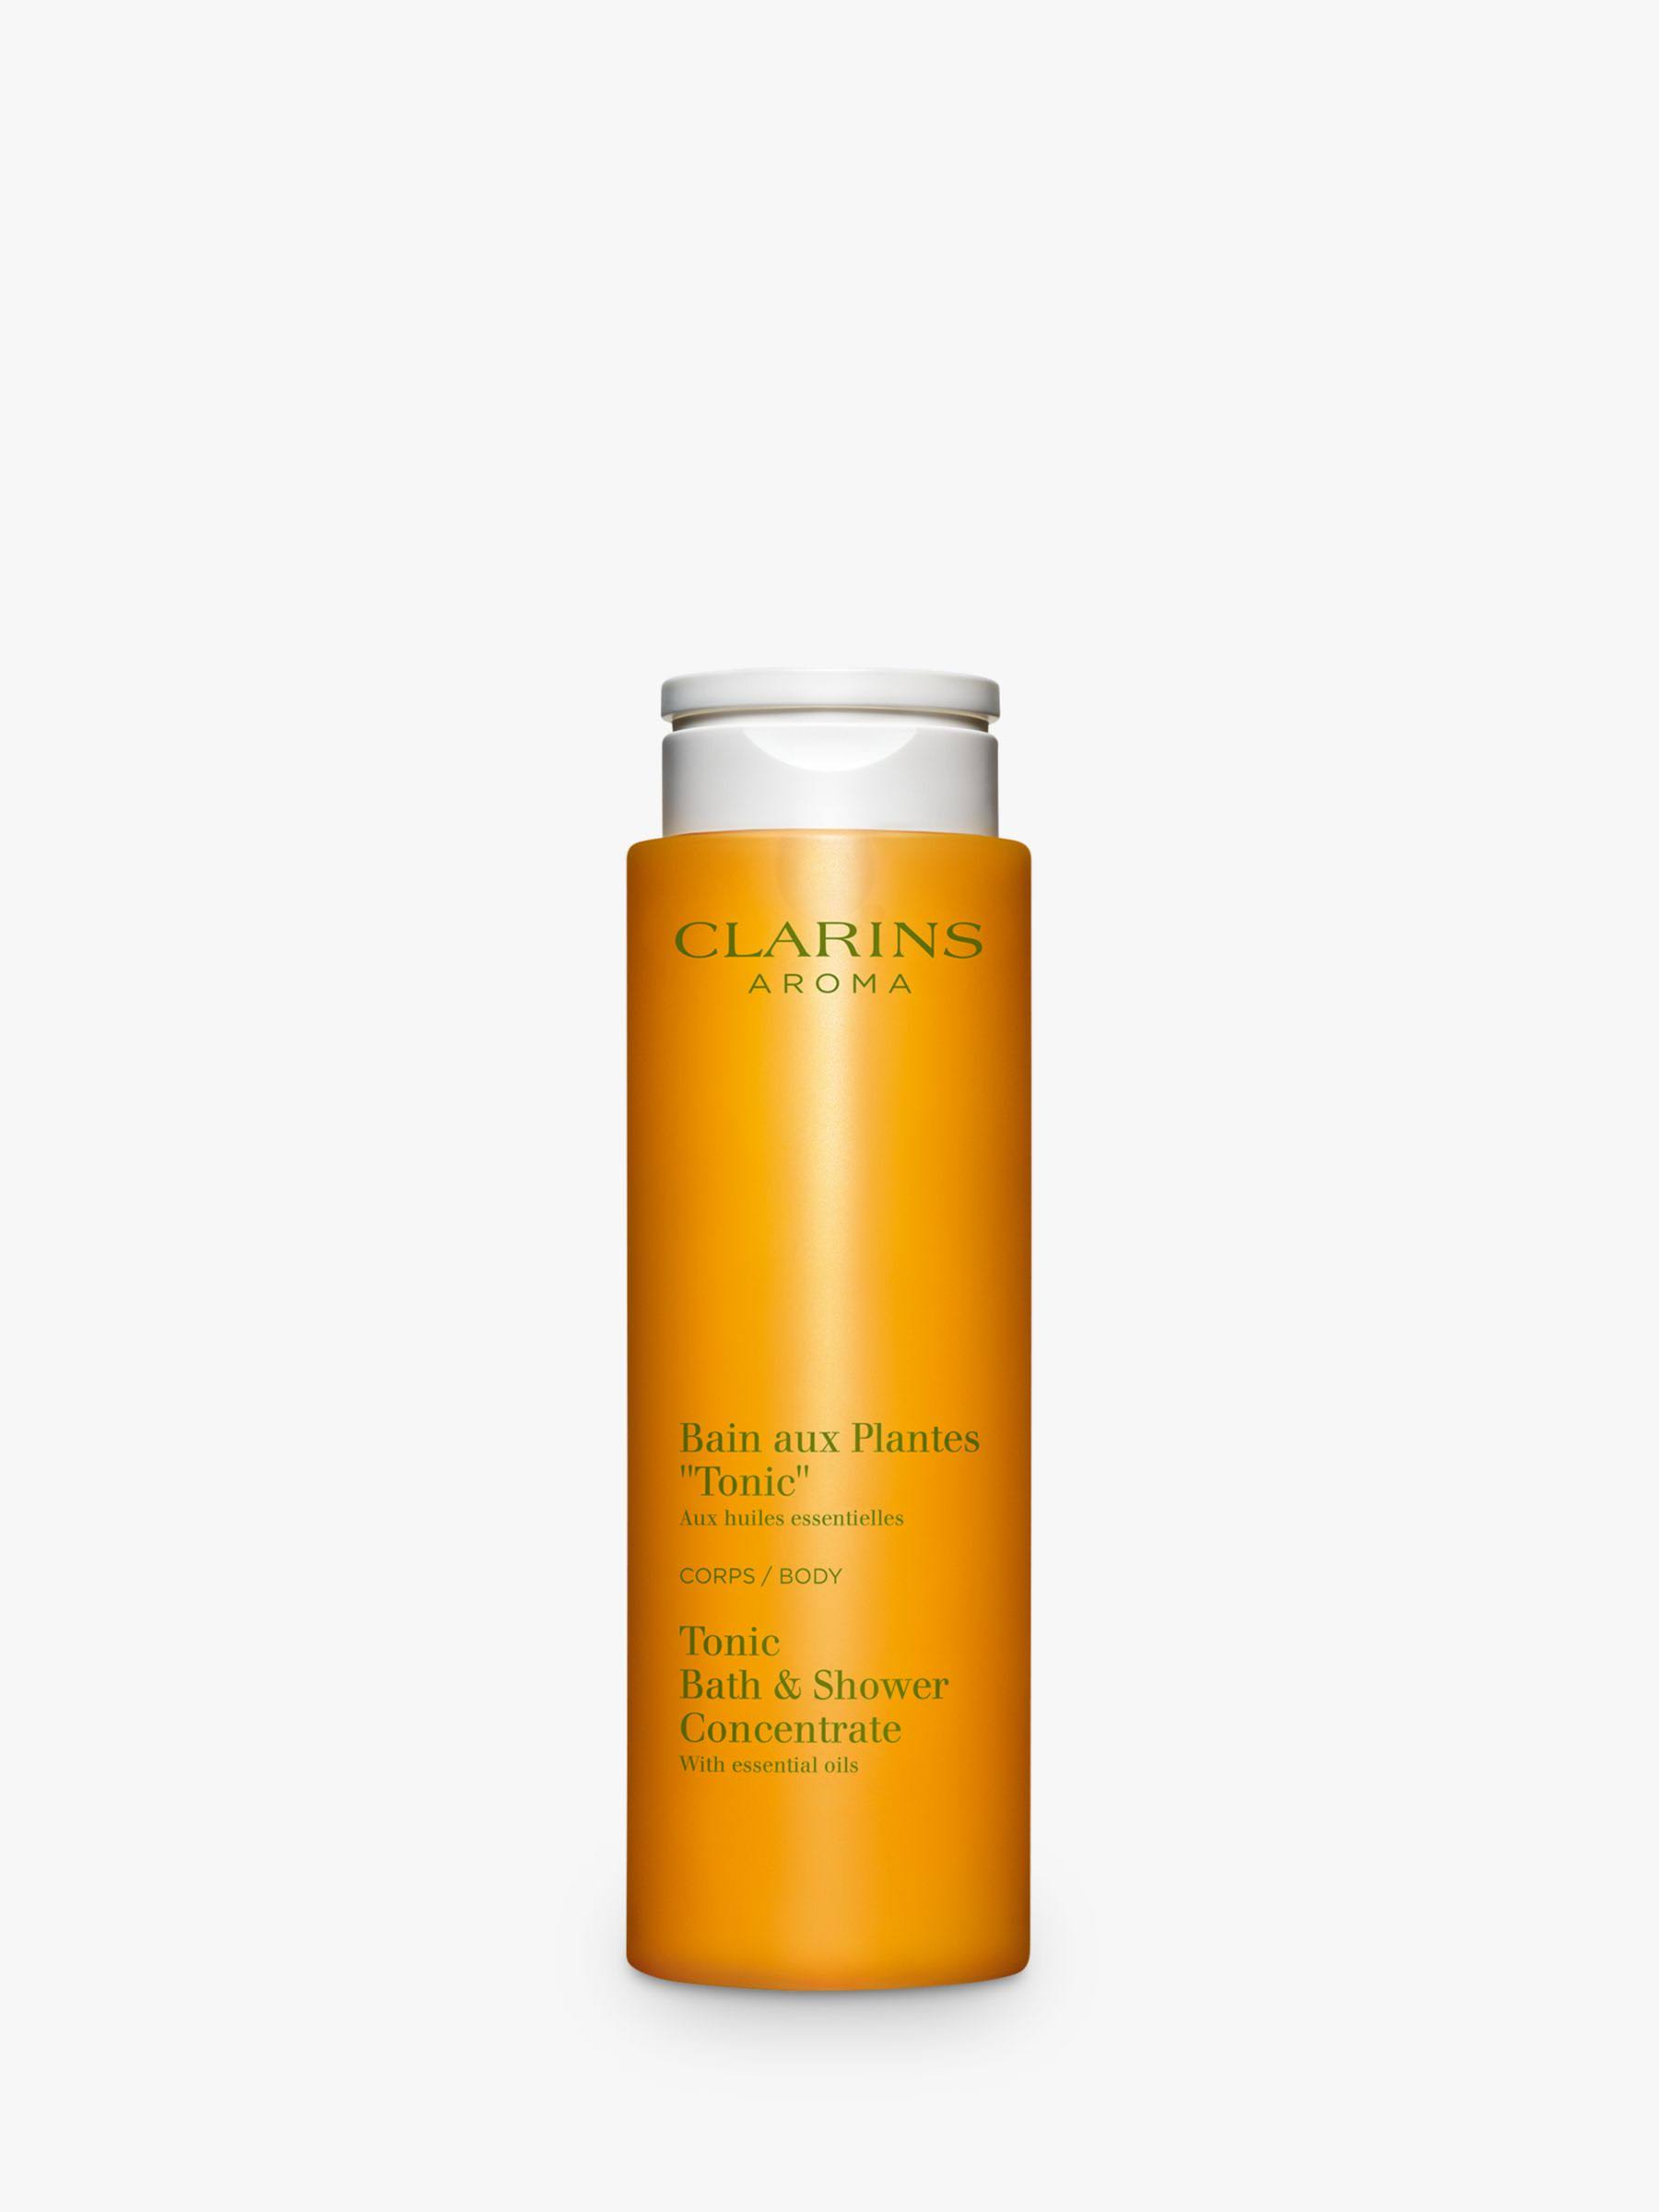 Clarins Aroma Tonic Bath & Shower Concentrate 200ml